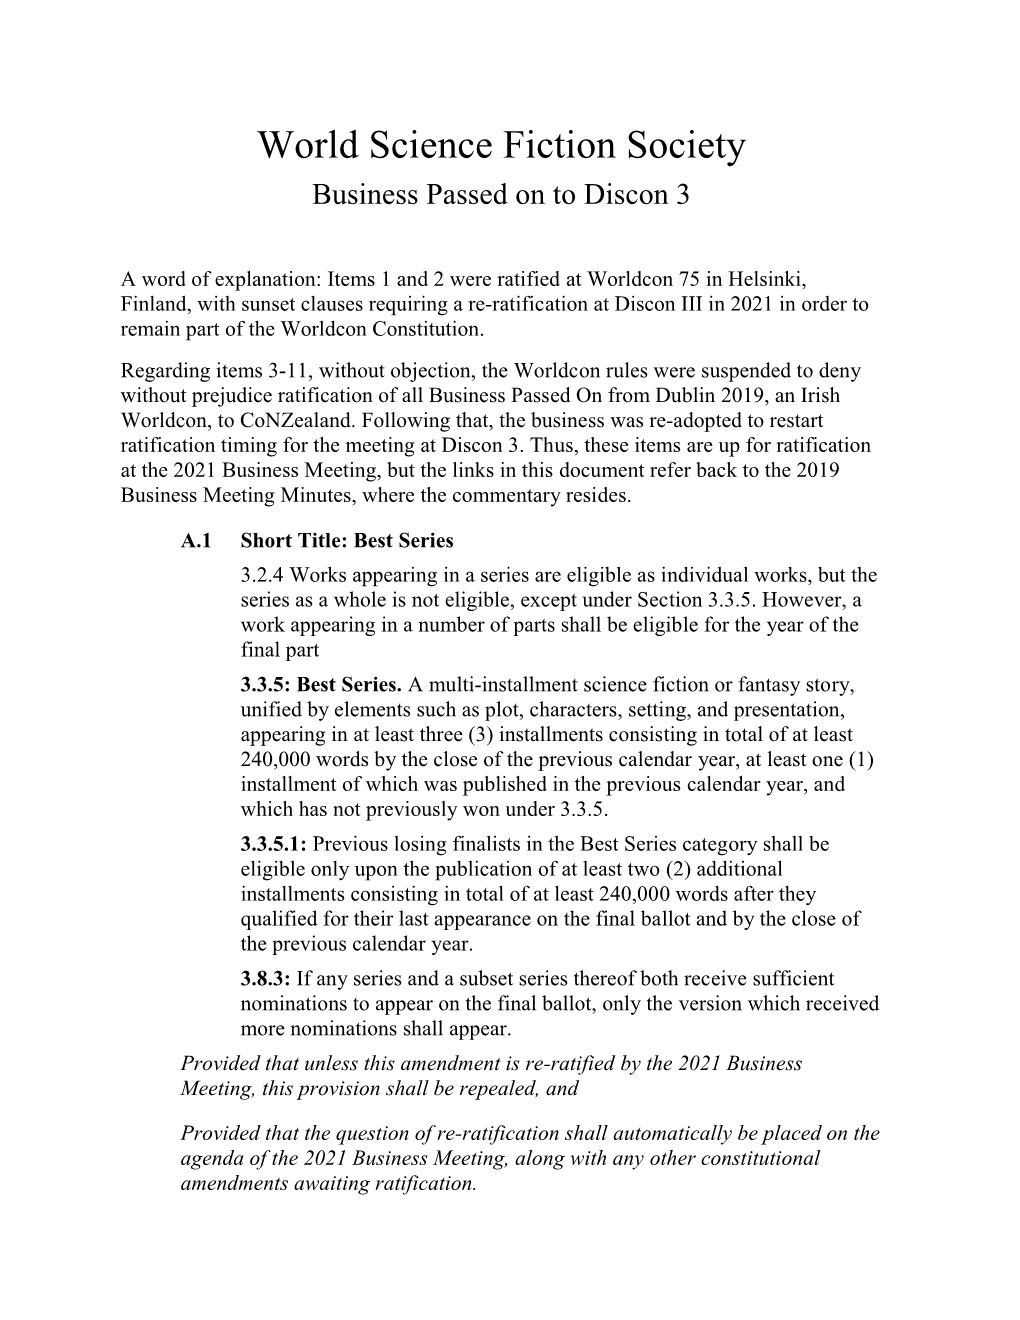 Business Passed on to Discon 3